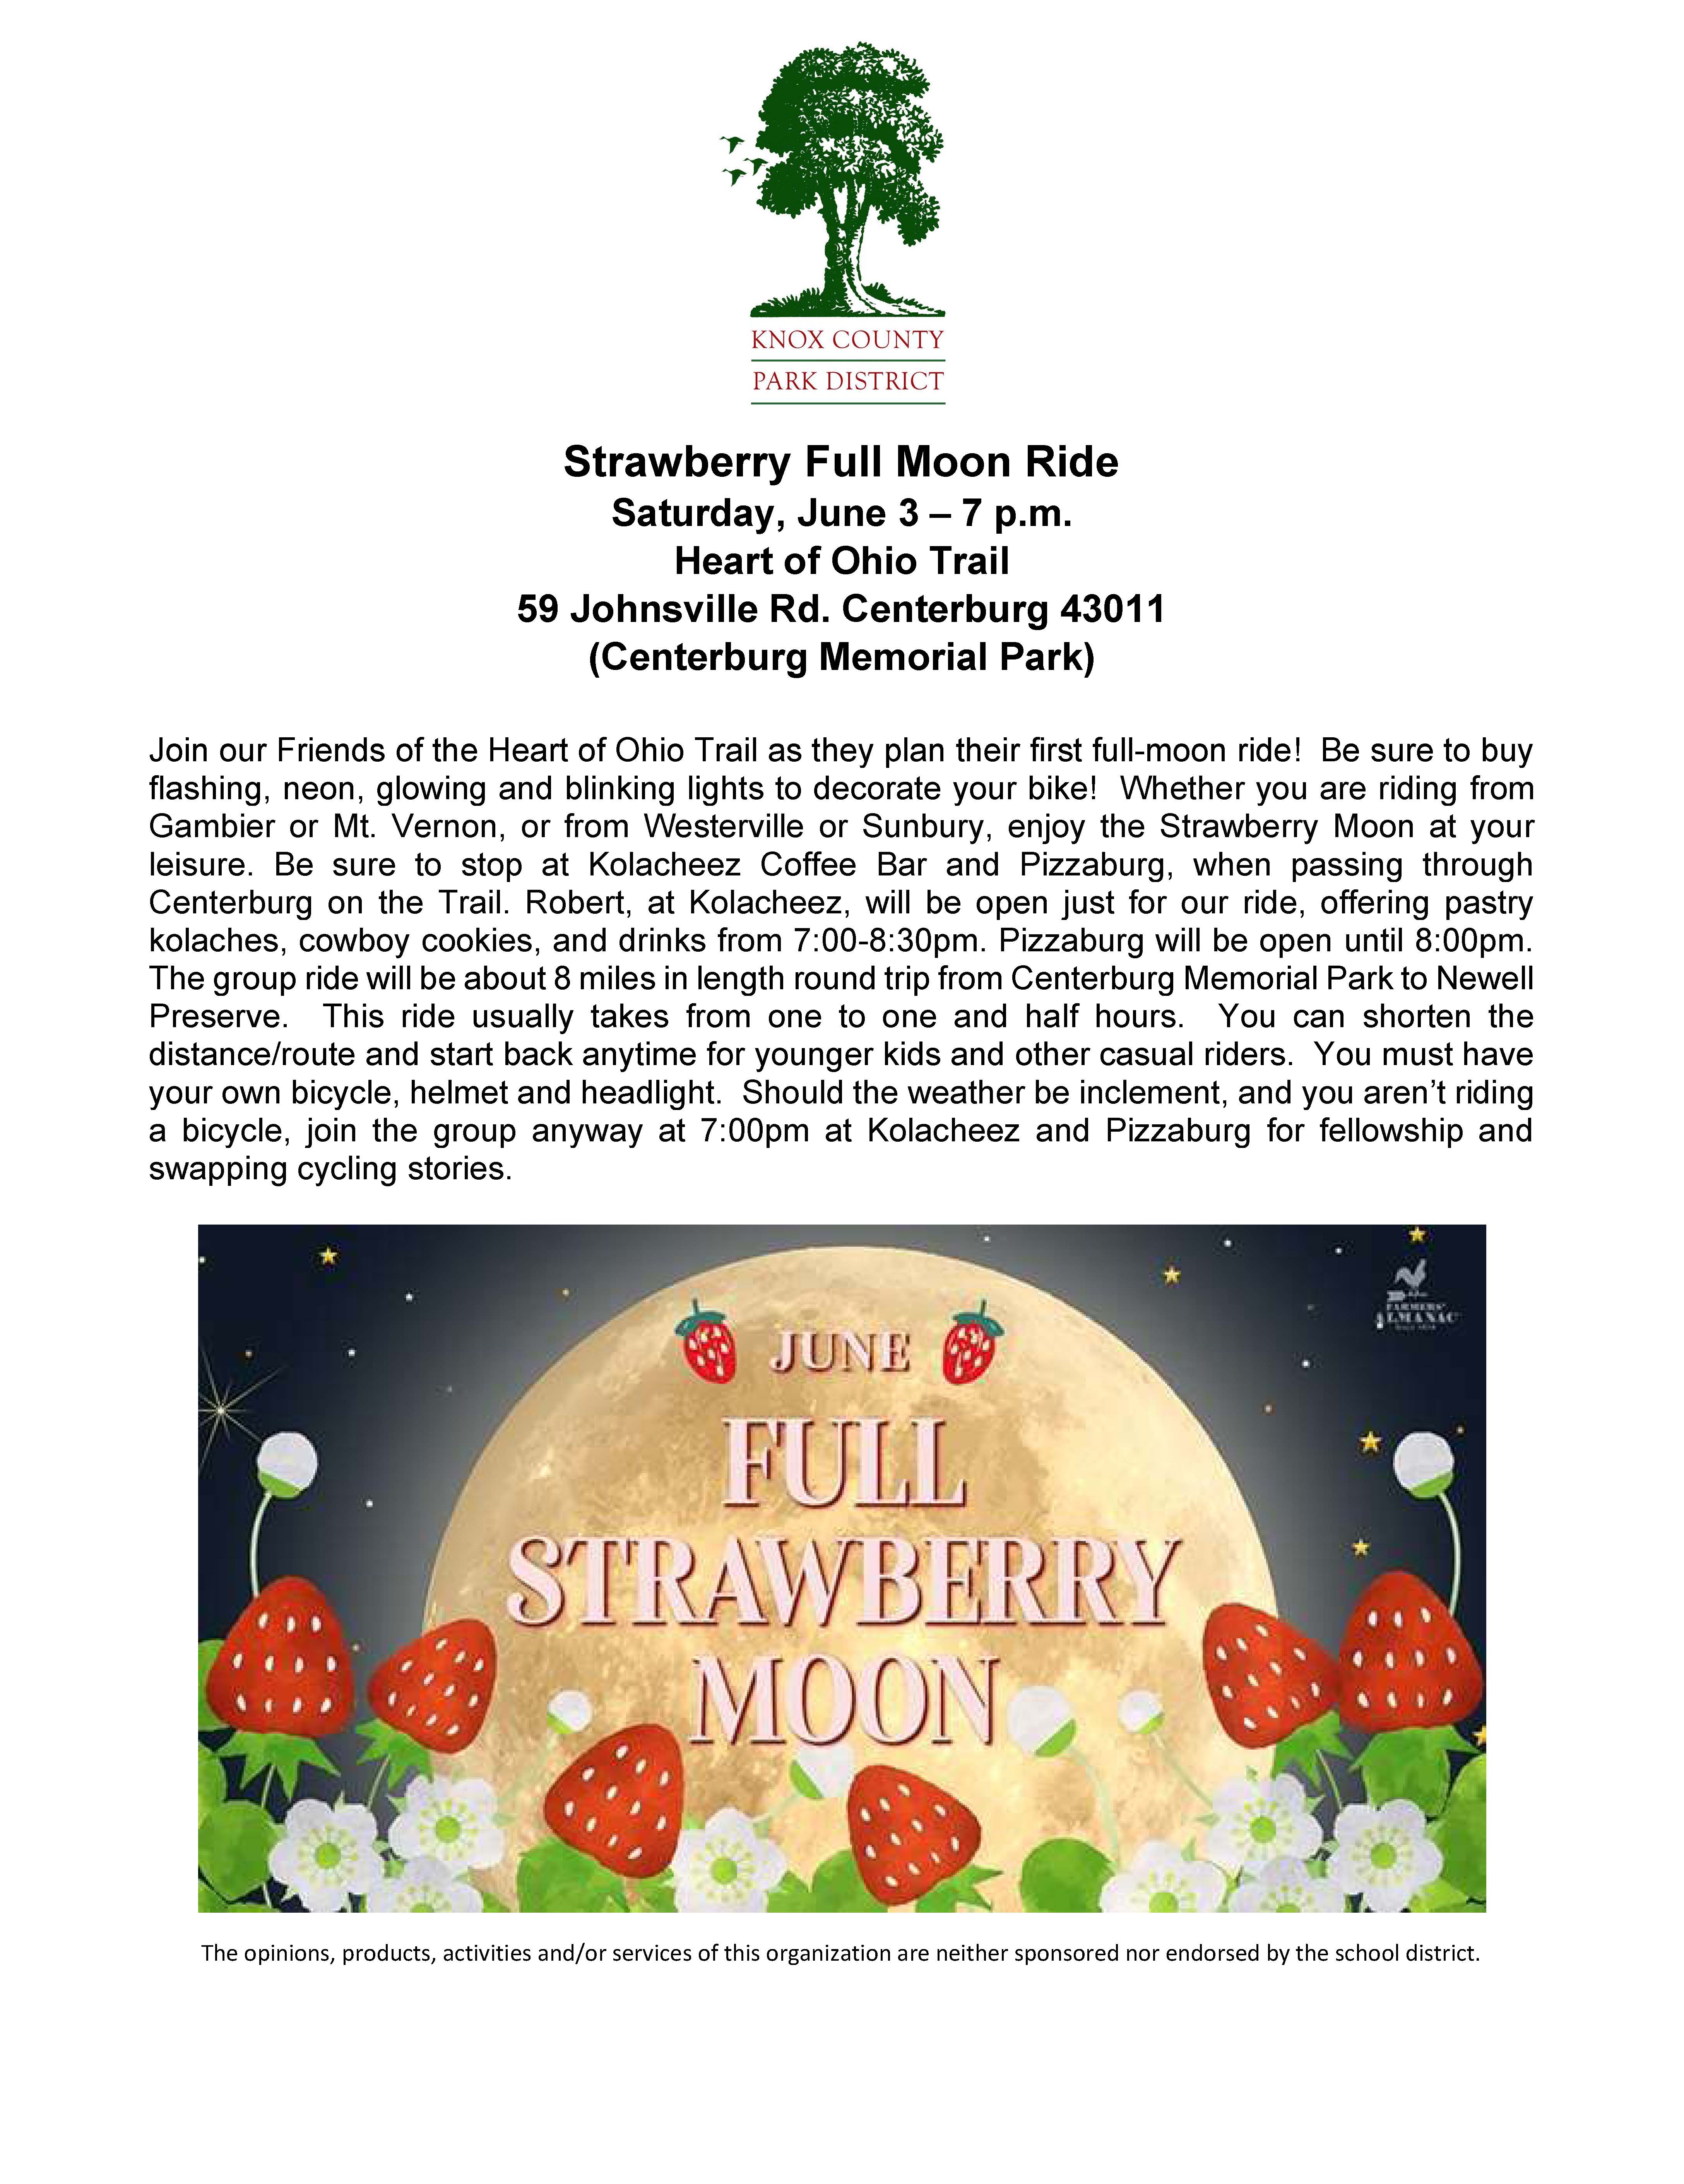 Knox county Park District Flyer of Full Strawberry Moon Bicycle Ride.